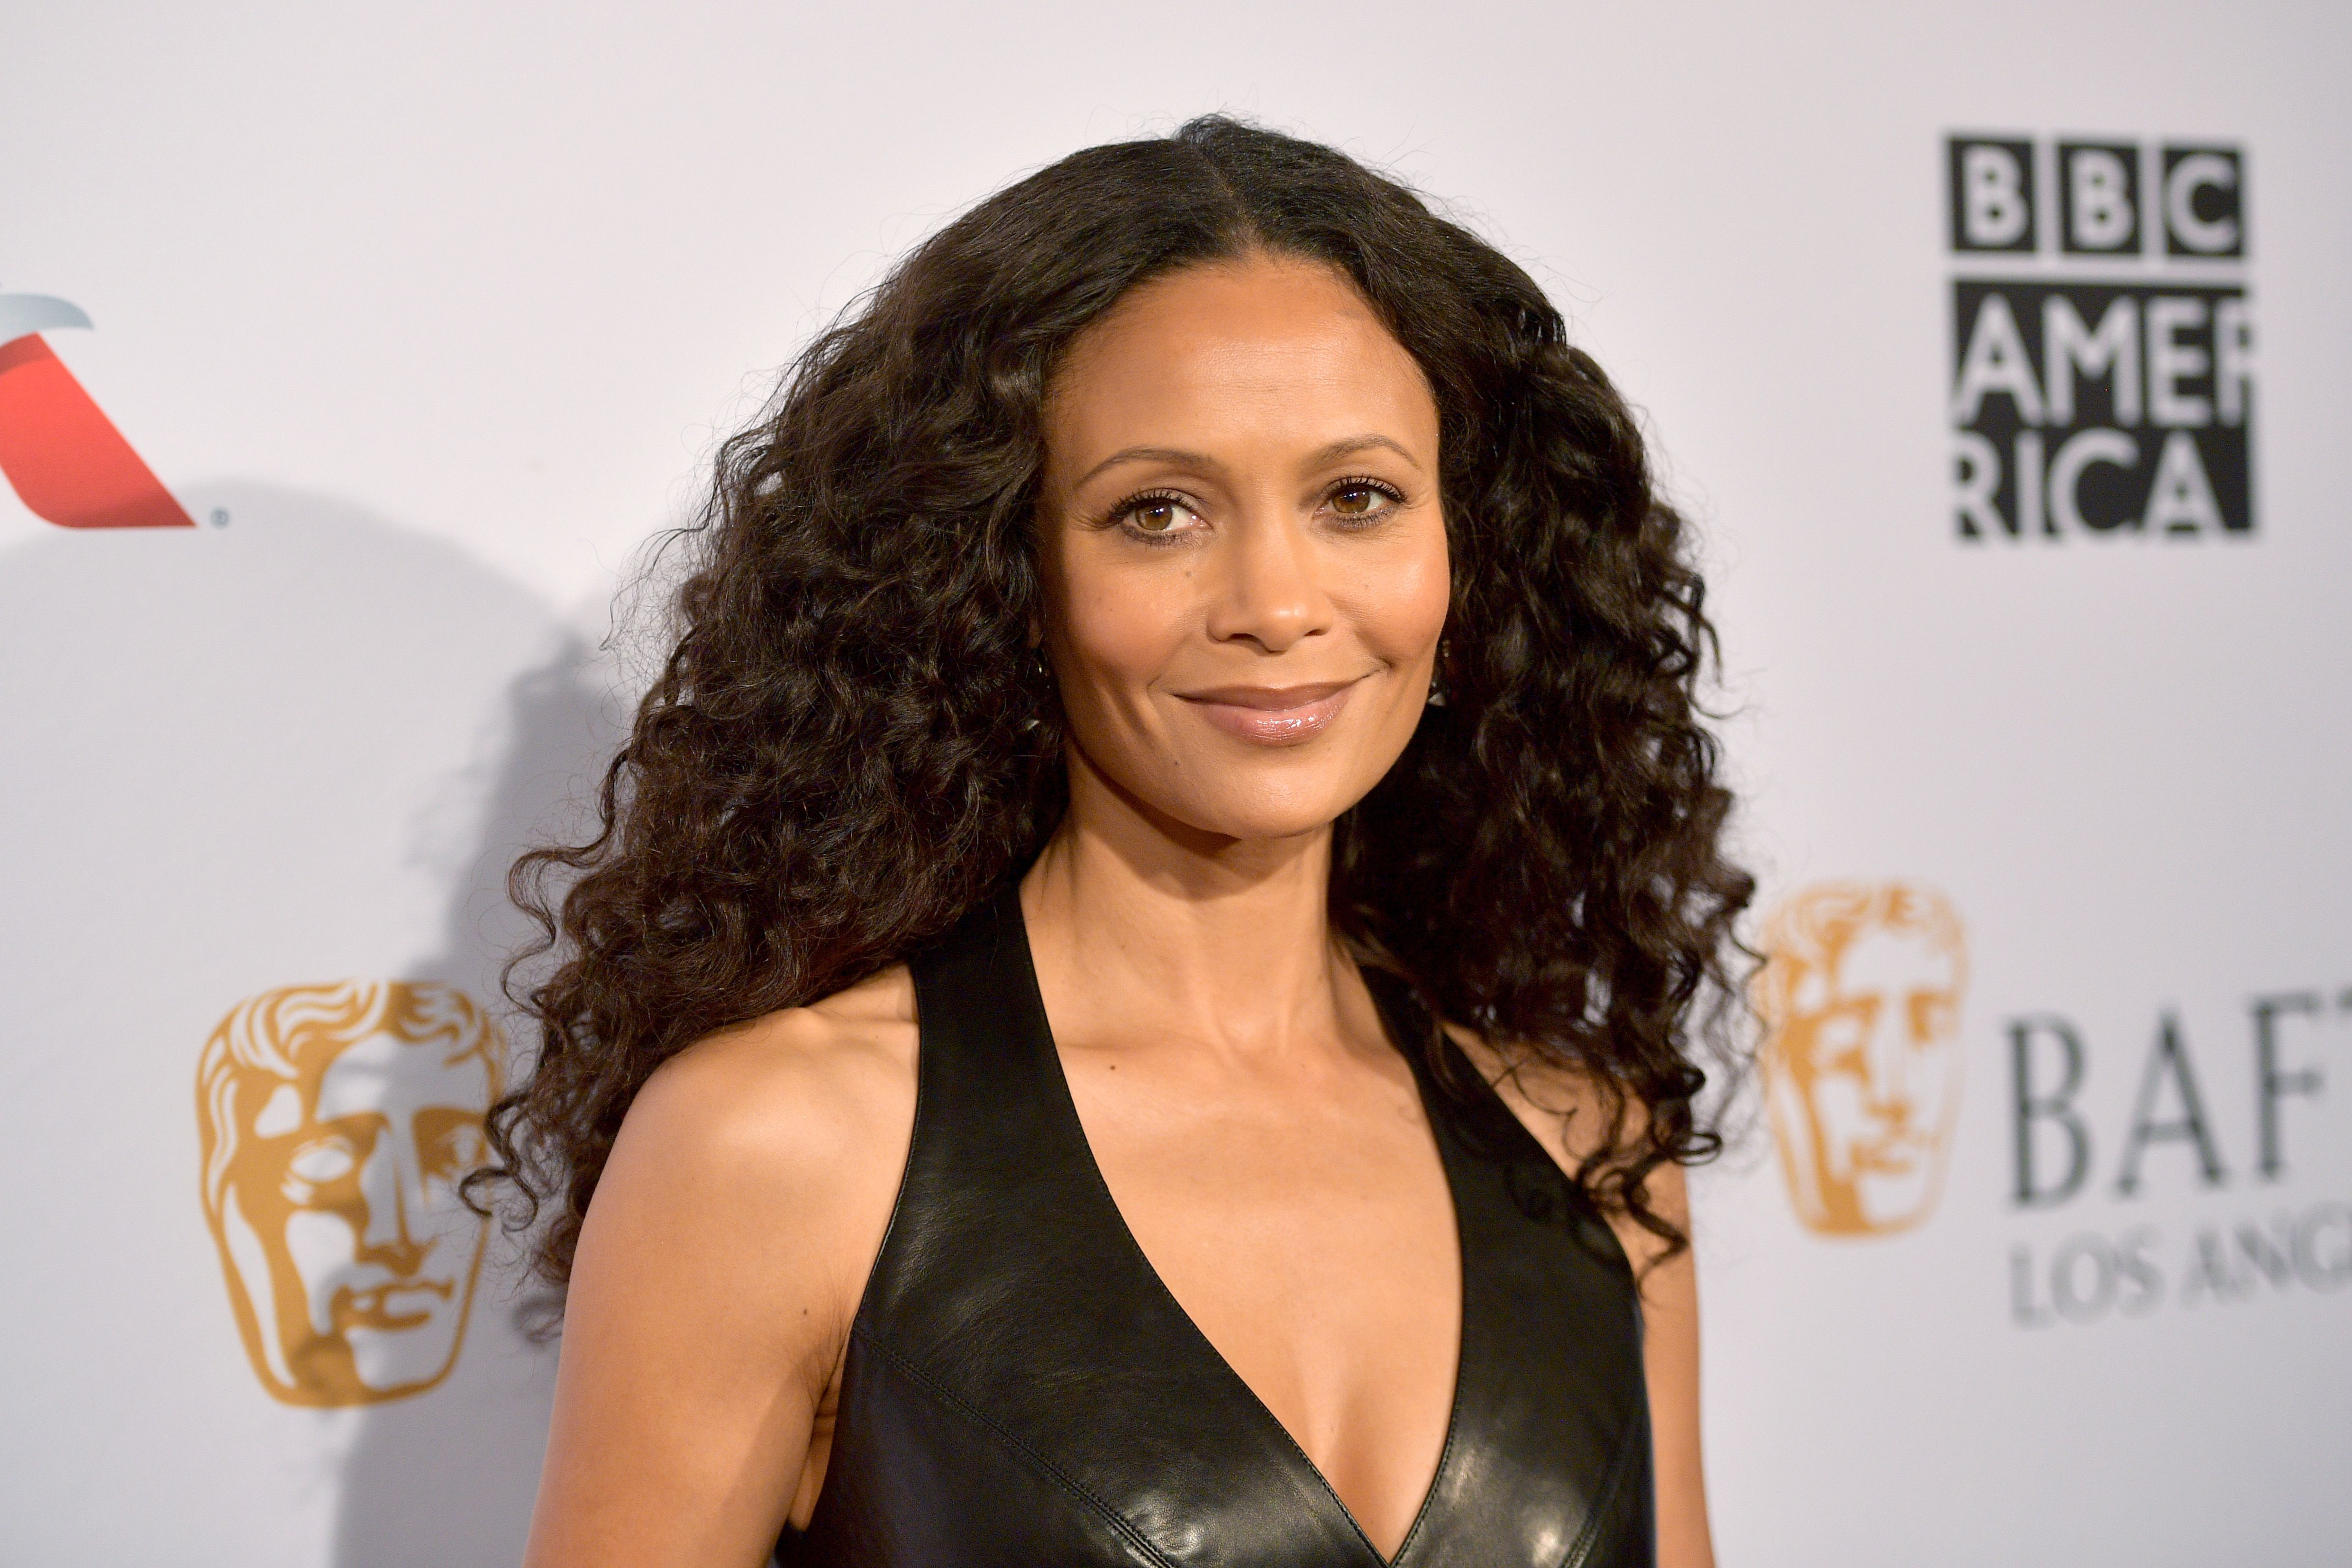 Thandie Newton on Surviving Sexual Assault as a Young Girl pic